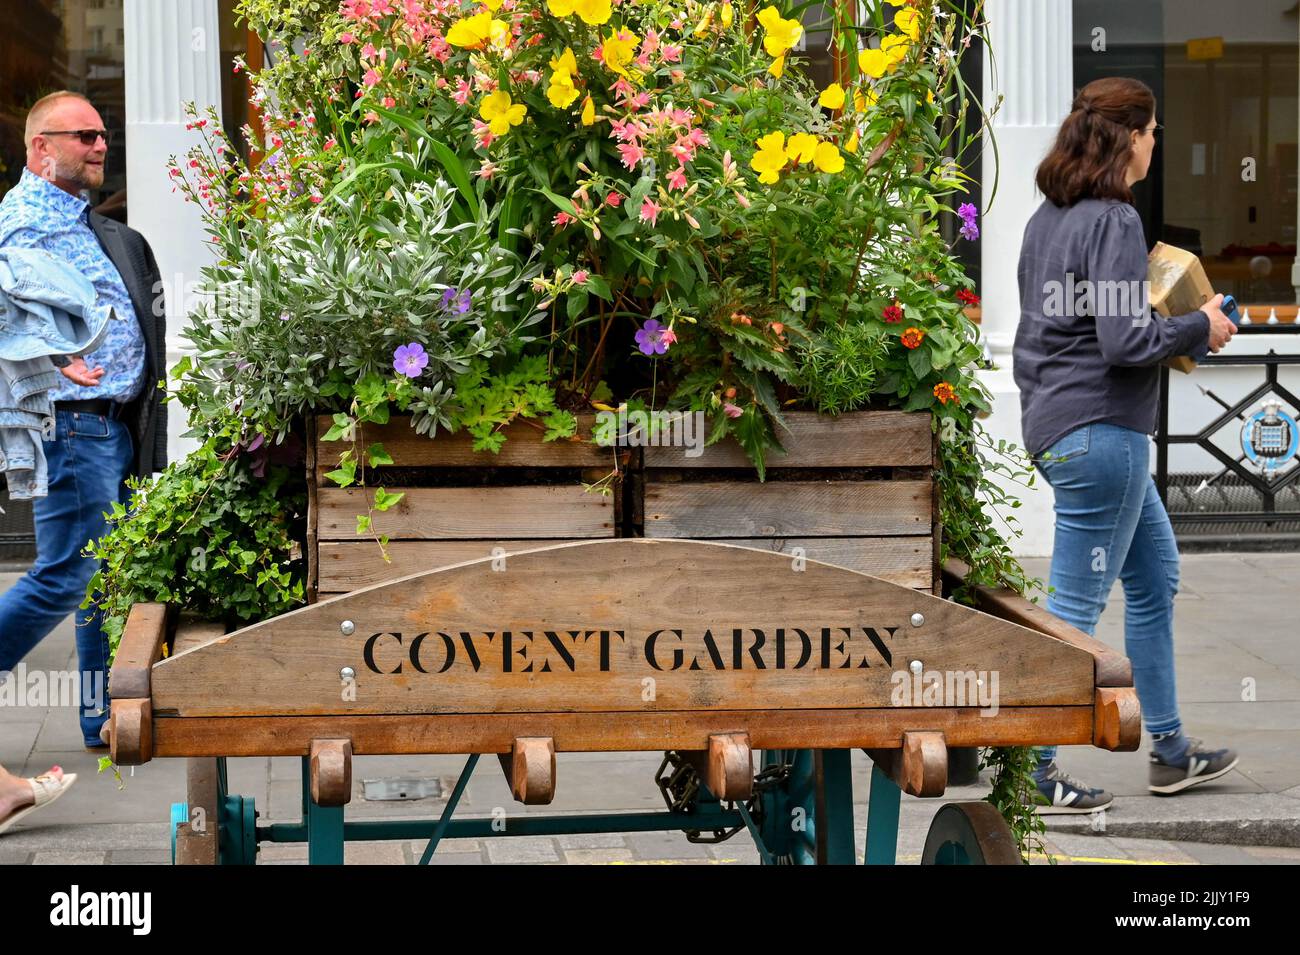 London, UK - June 2022: Sign carved into an old wooden cart with a flowerbed on top advertising the entrance to Covent Garden Stock Photo